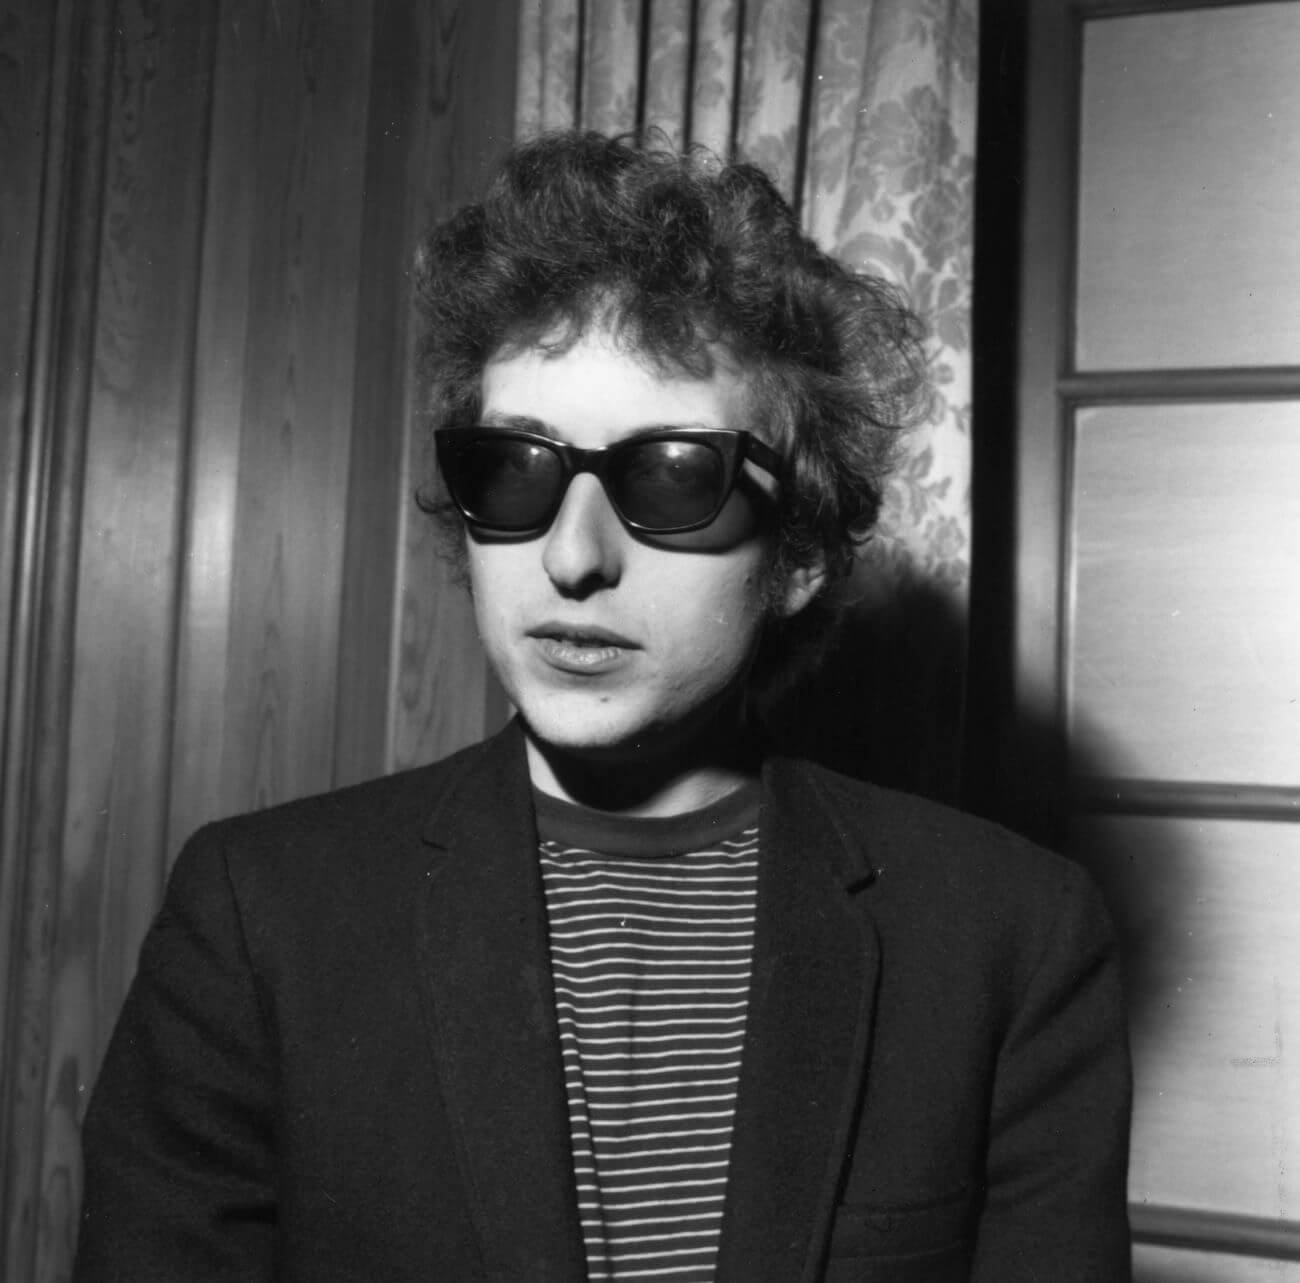 A black and white picture of Bob Dylan wearing sunglasses and a striped shirt.